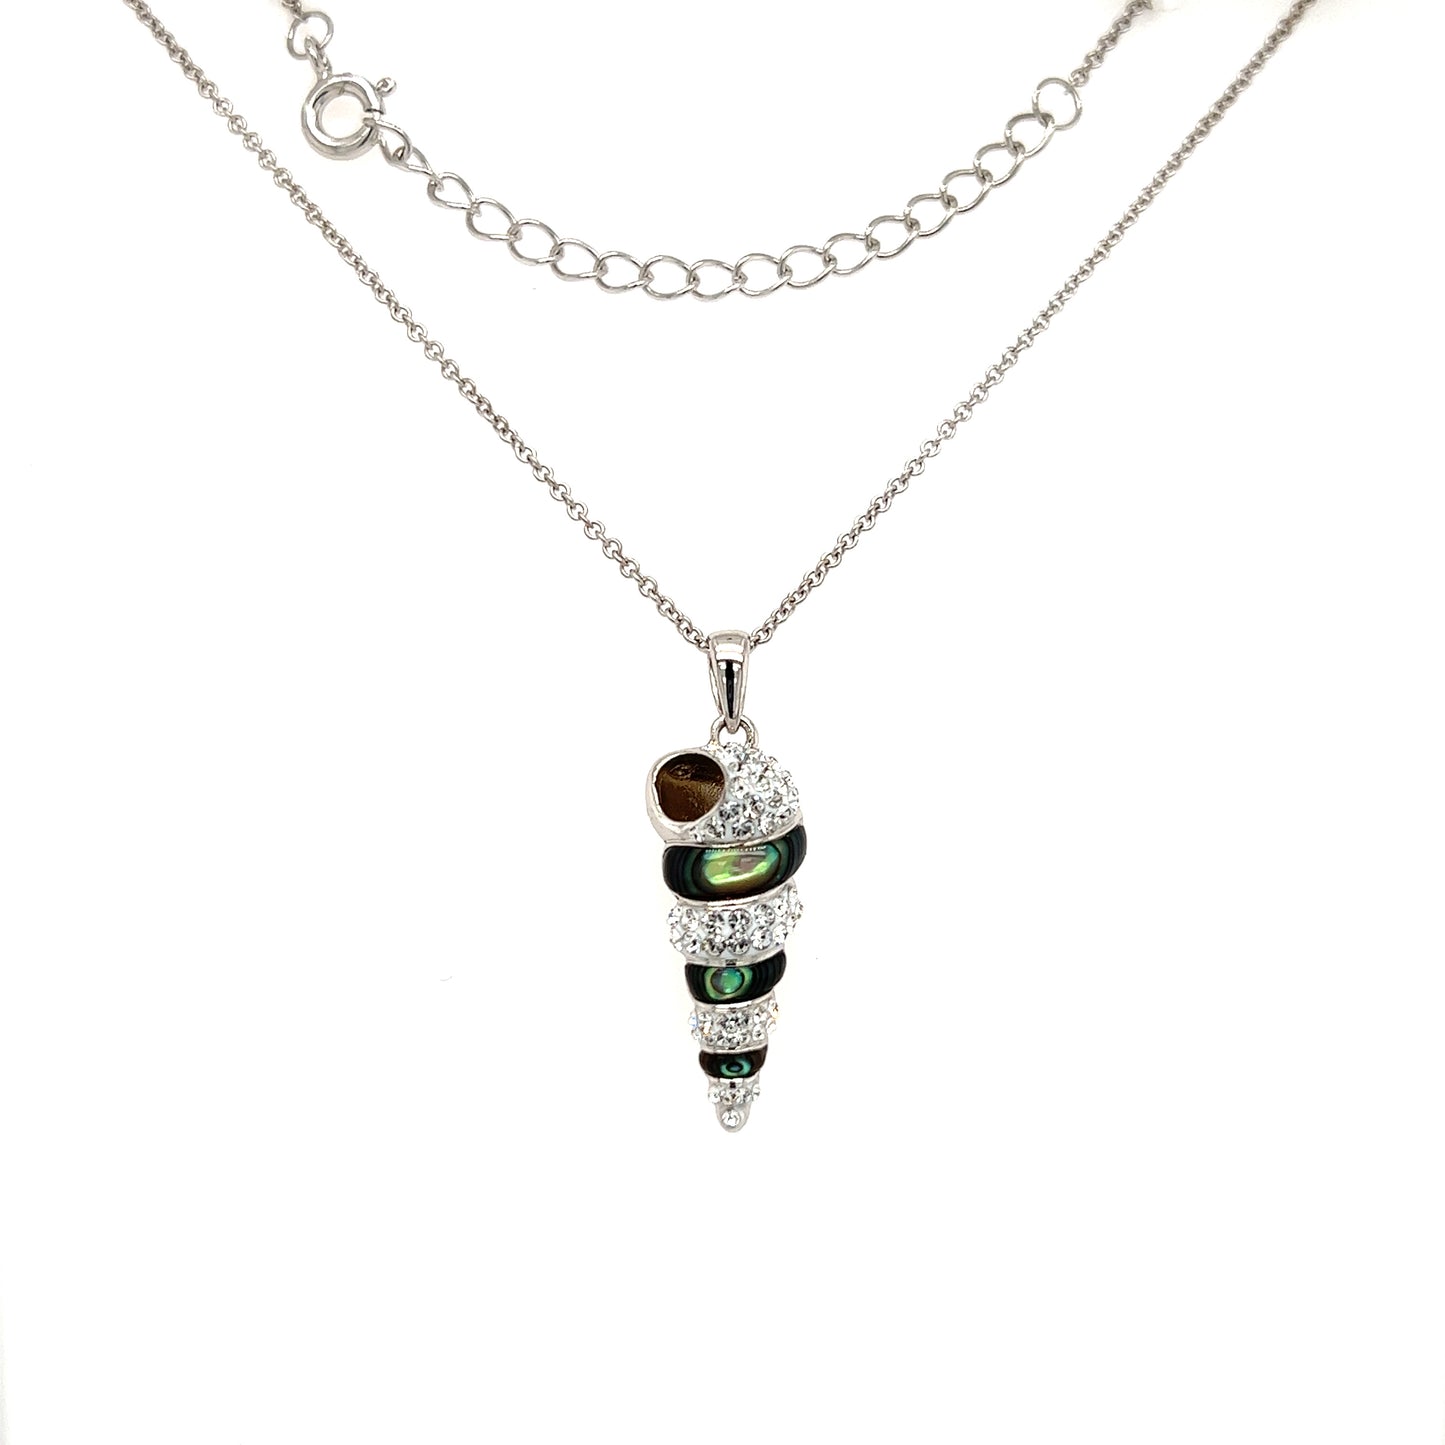 Abalone Shell Necklace with Swarovski Crystals in Sterling Silver Necklace View